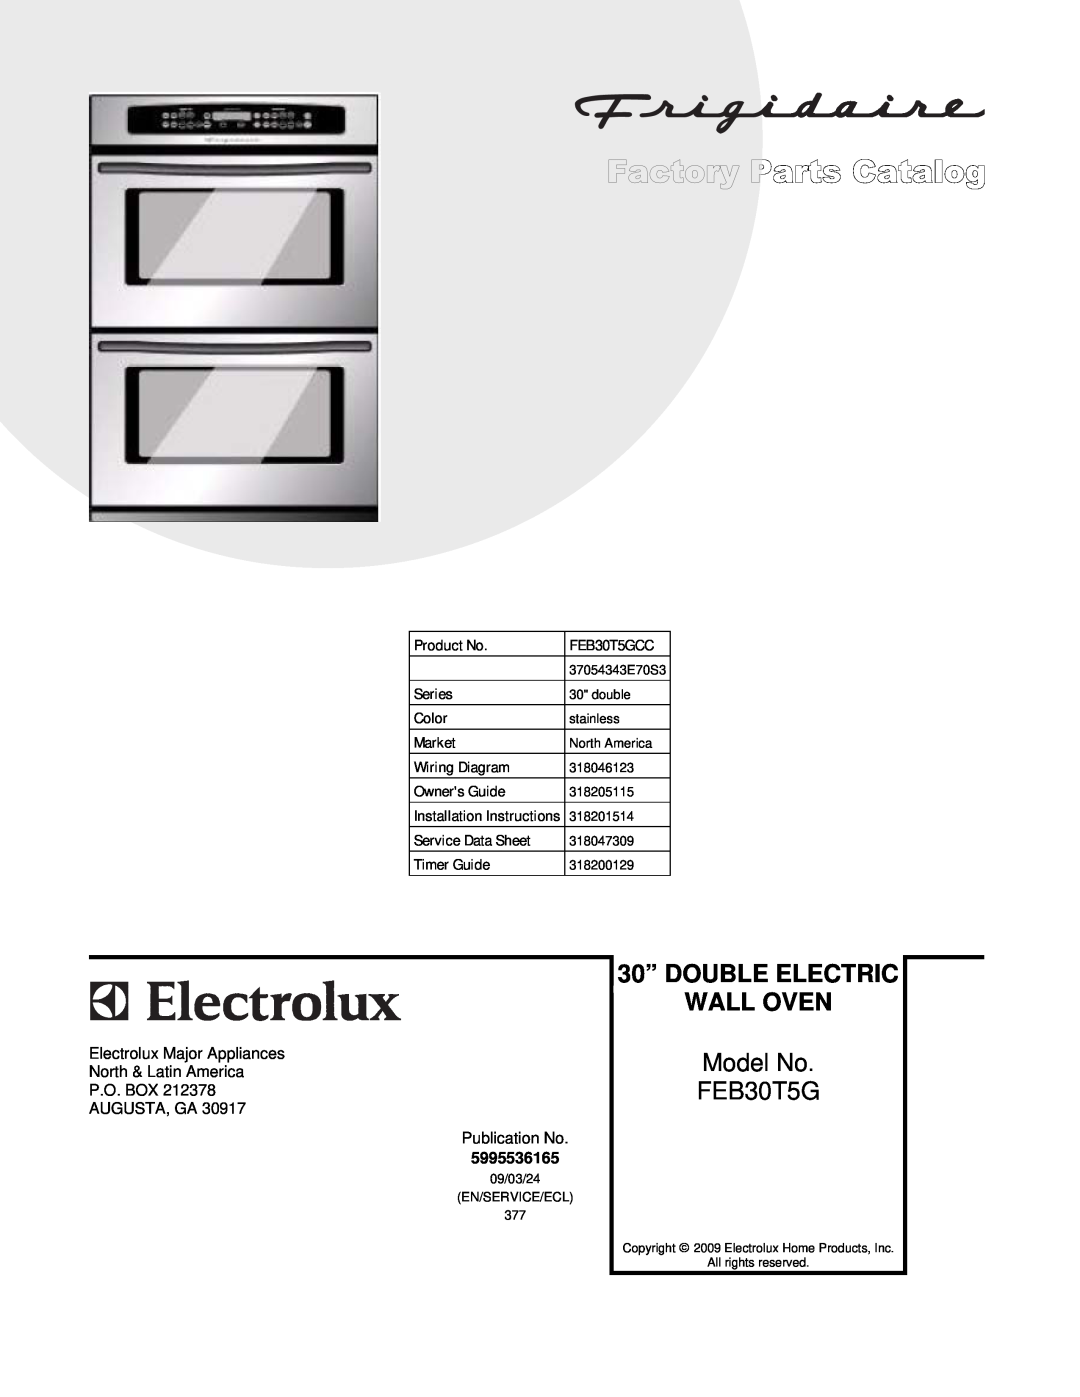 Frigidaire FEB30T5GCC installation instructions 30” DOUBLE ELECTRIC, Wall Oven, Model No, DCFEB30S5GC2.eps 318046123.eps 